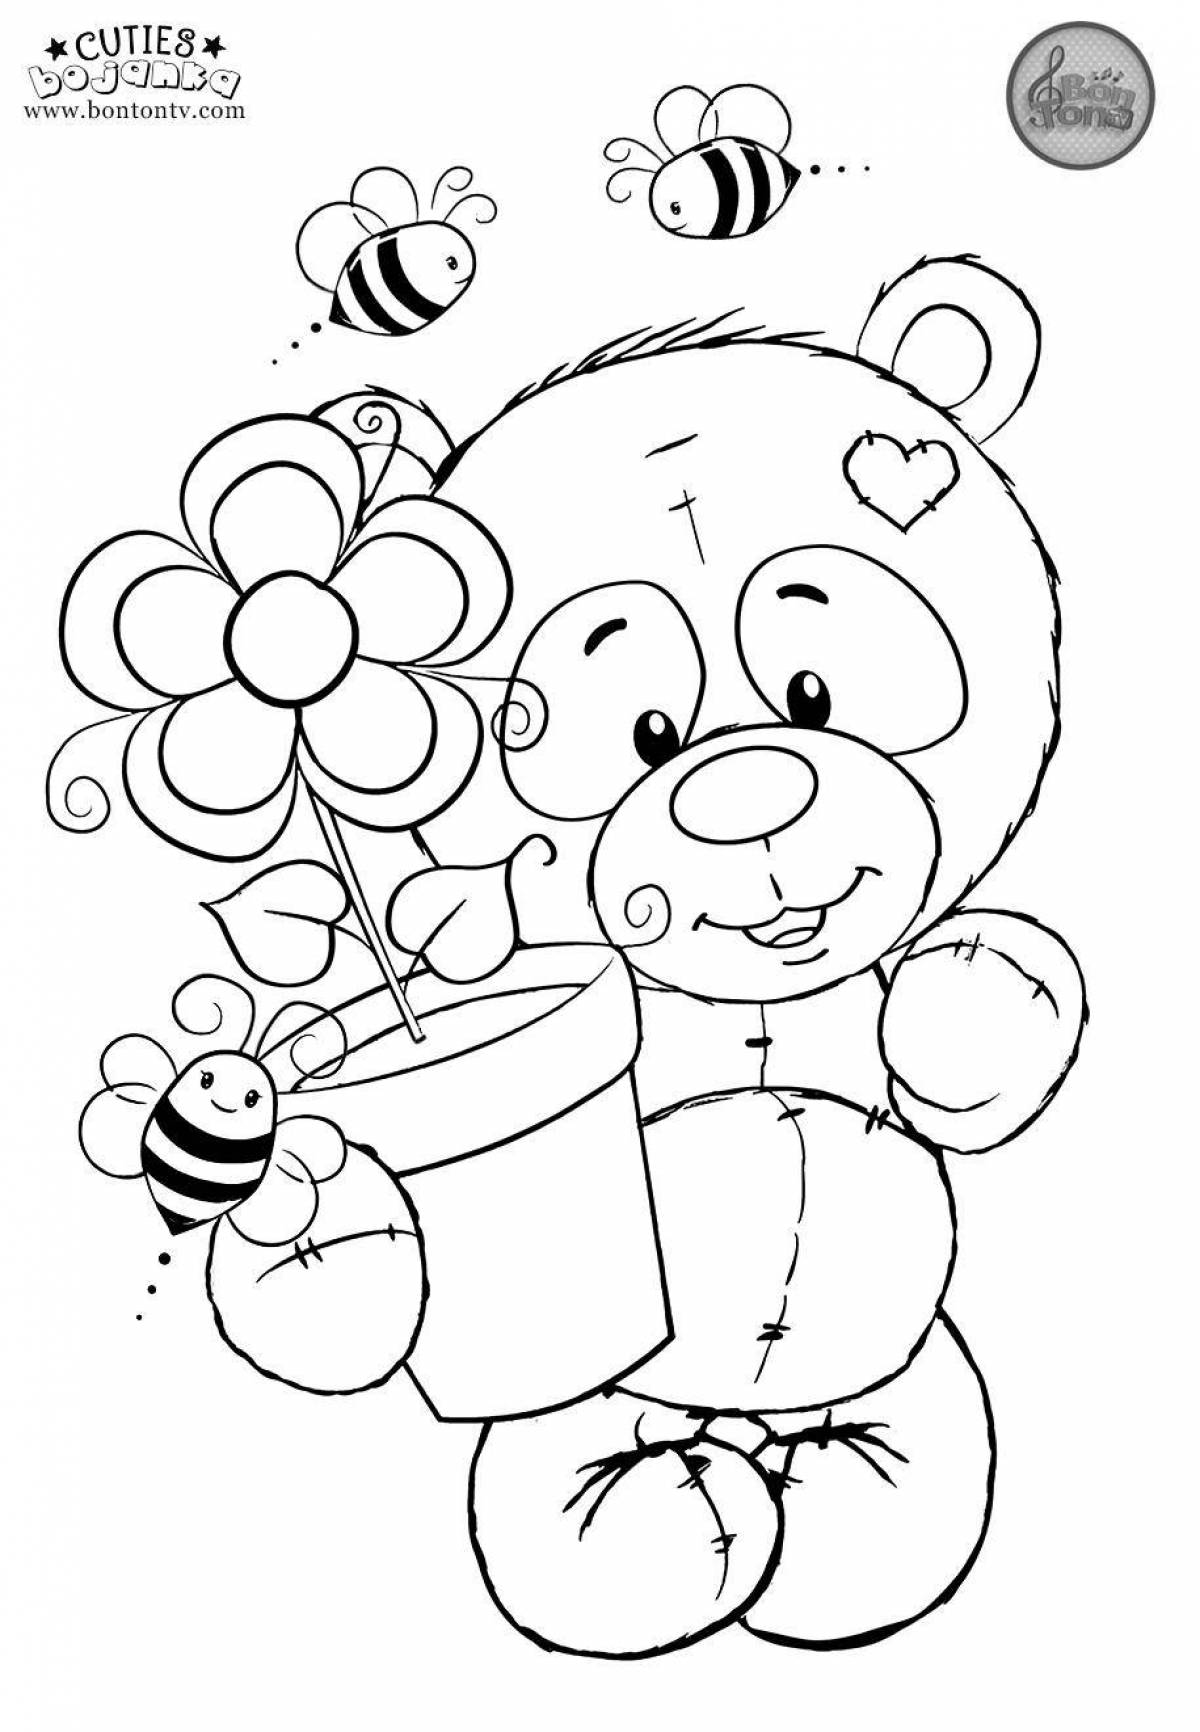 Glowing gummy bear coloring page